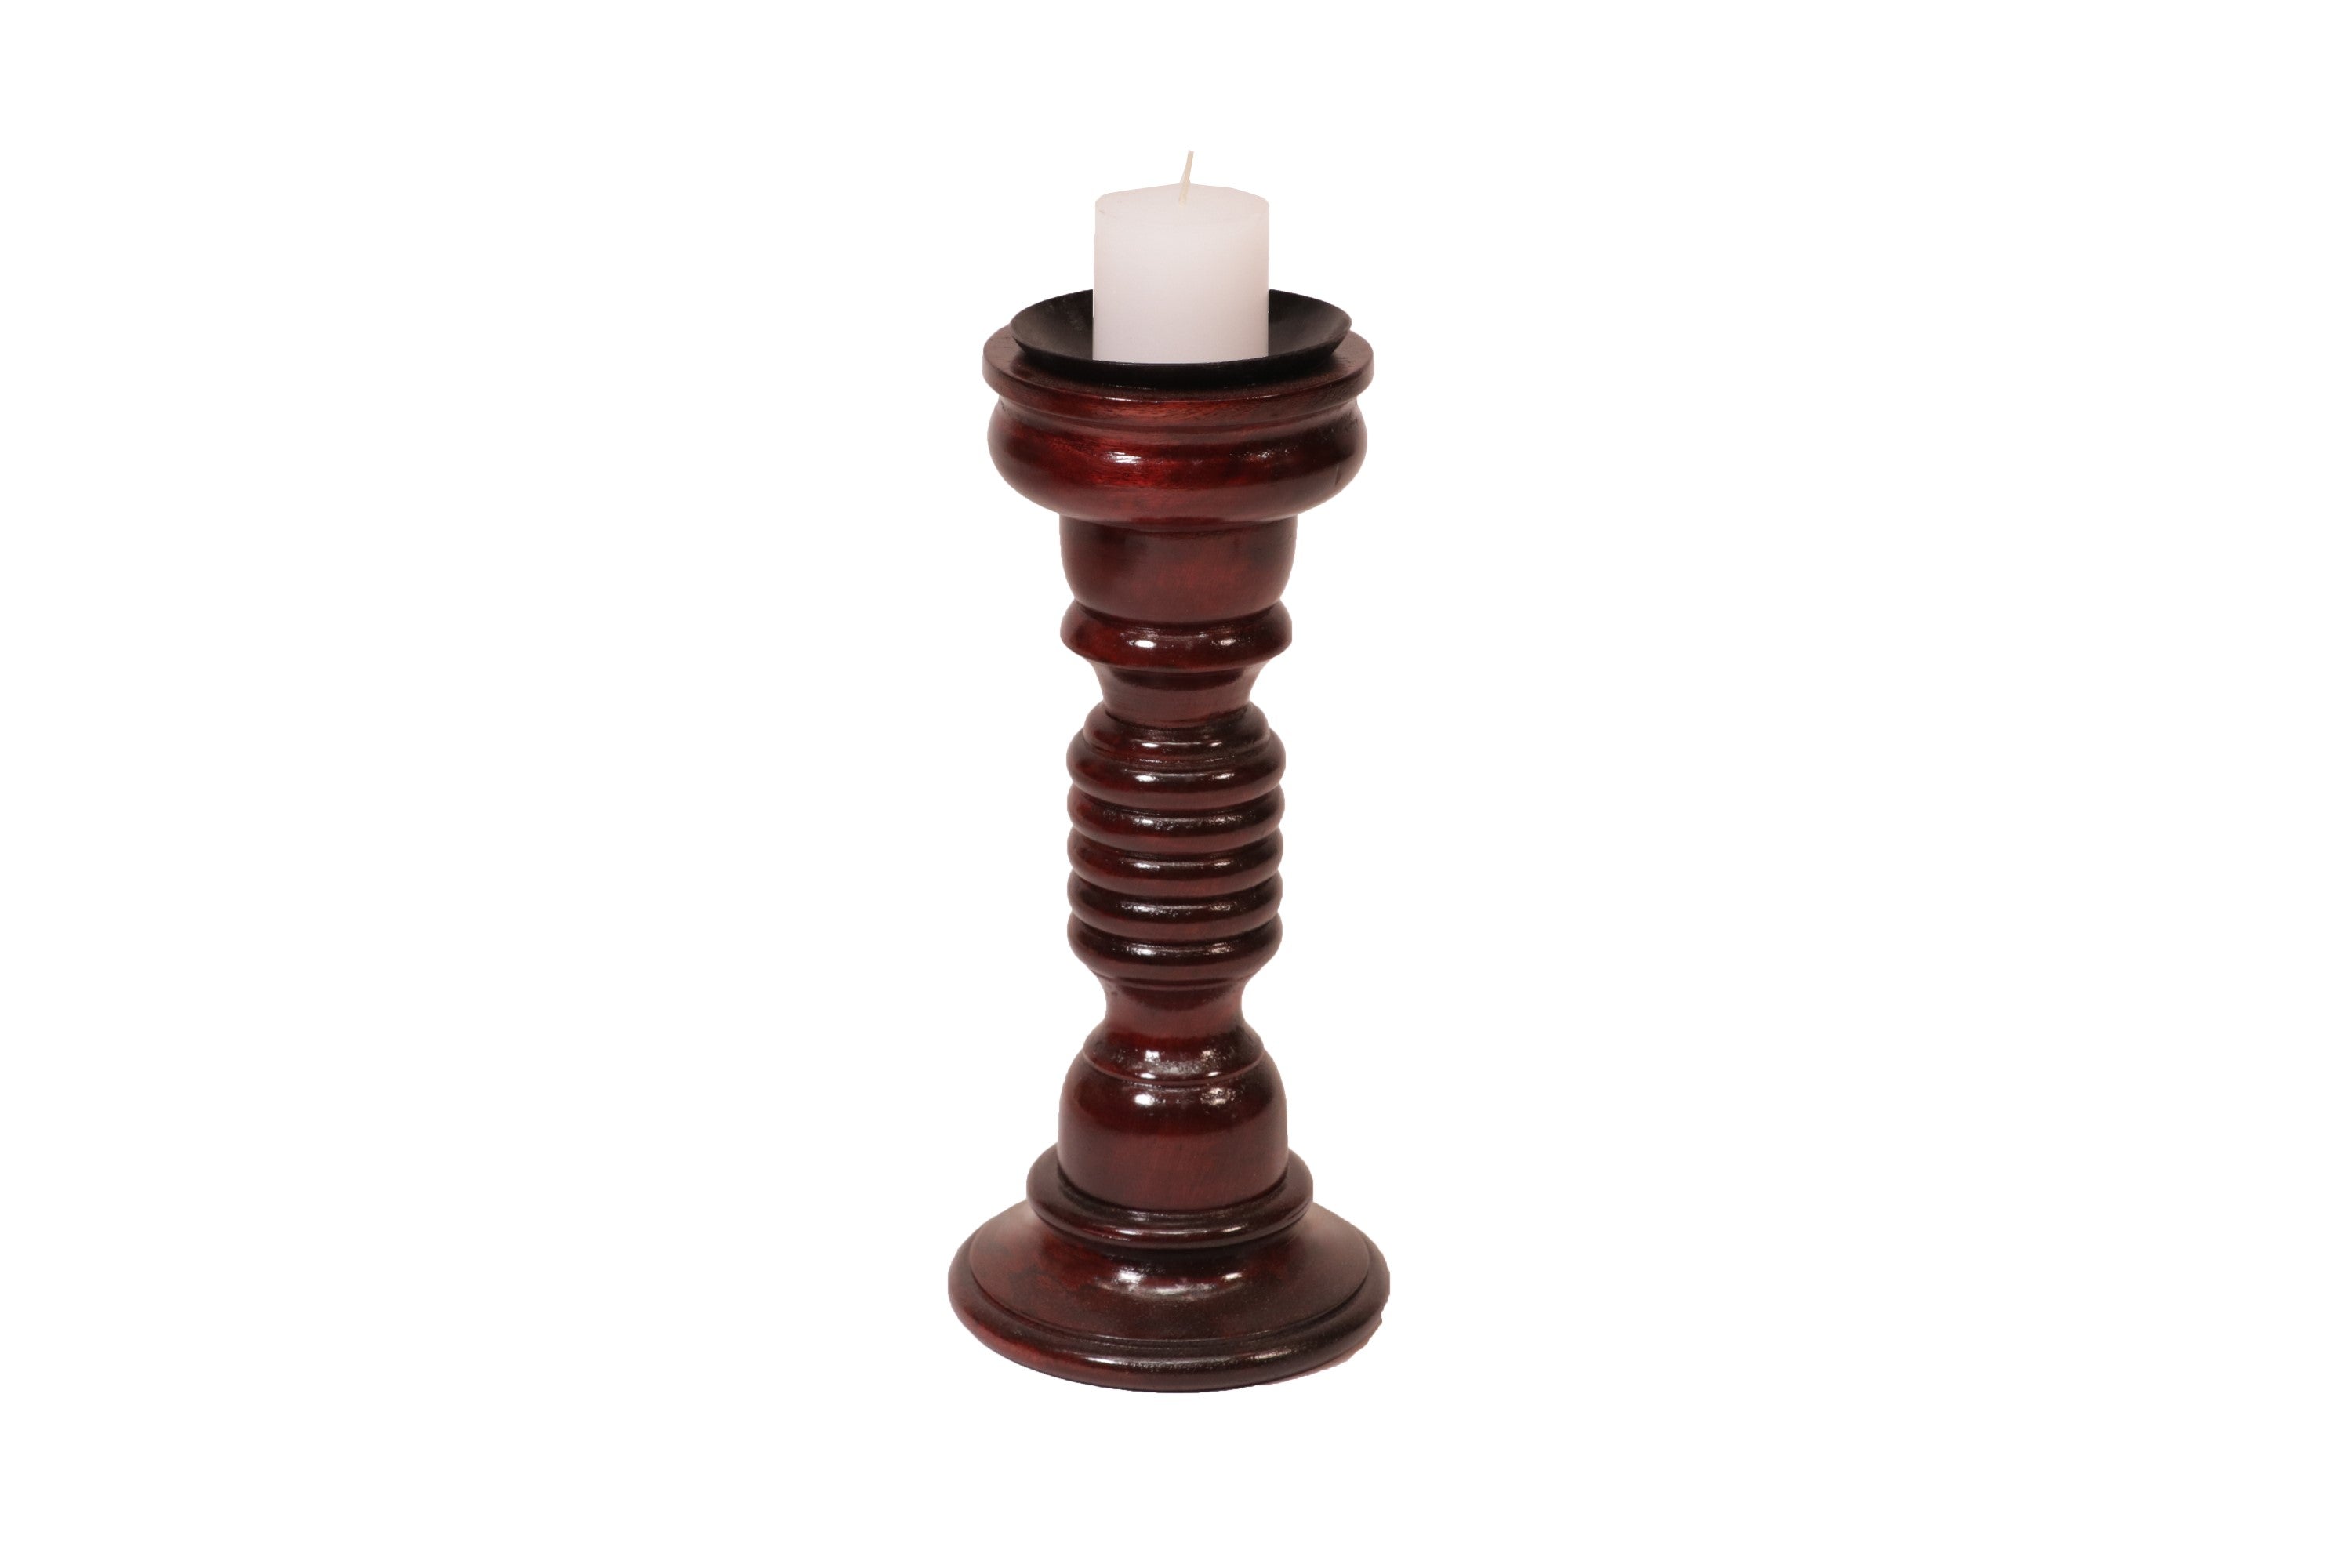 Wooden Risen Ring Candle Holder Medium (5 x 5 x 12 Inch) Candle Holder